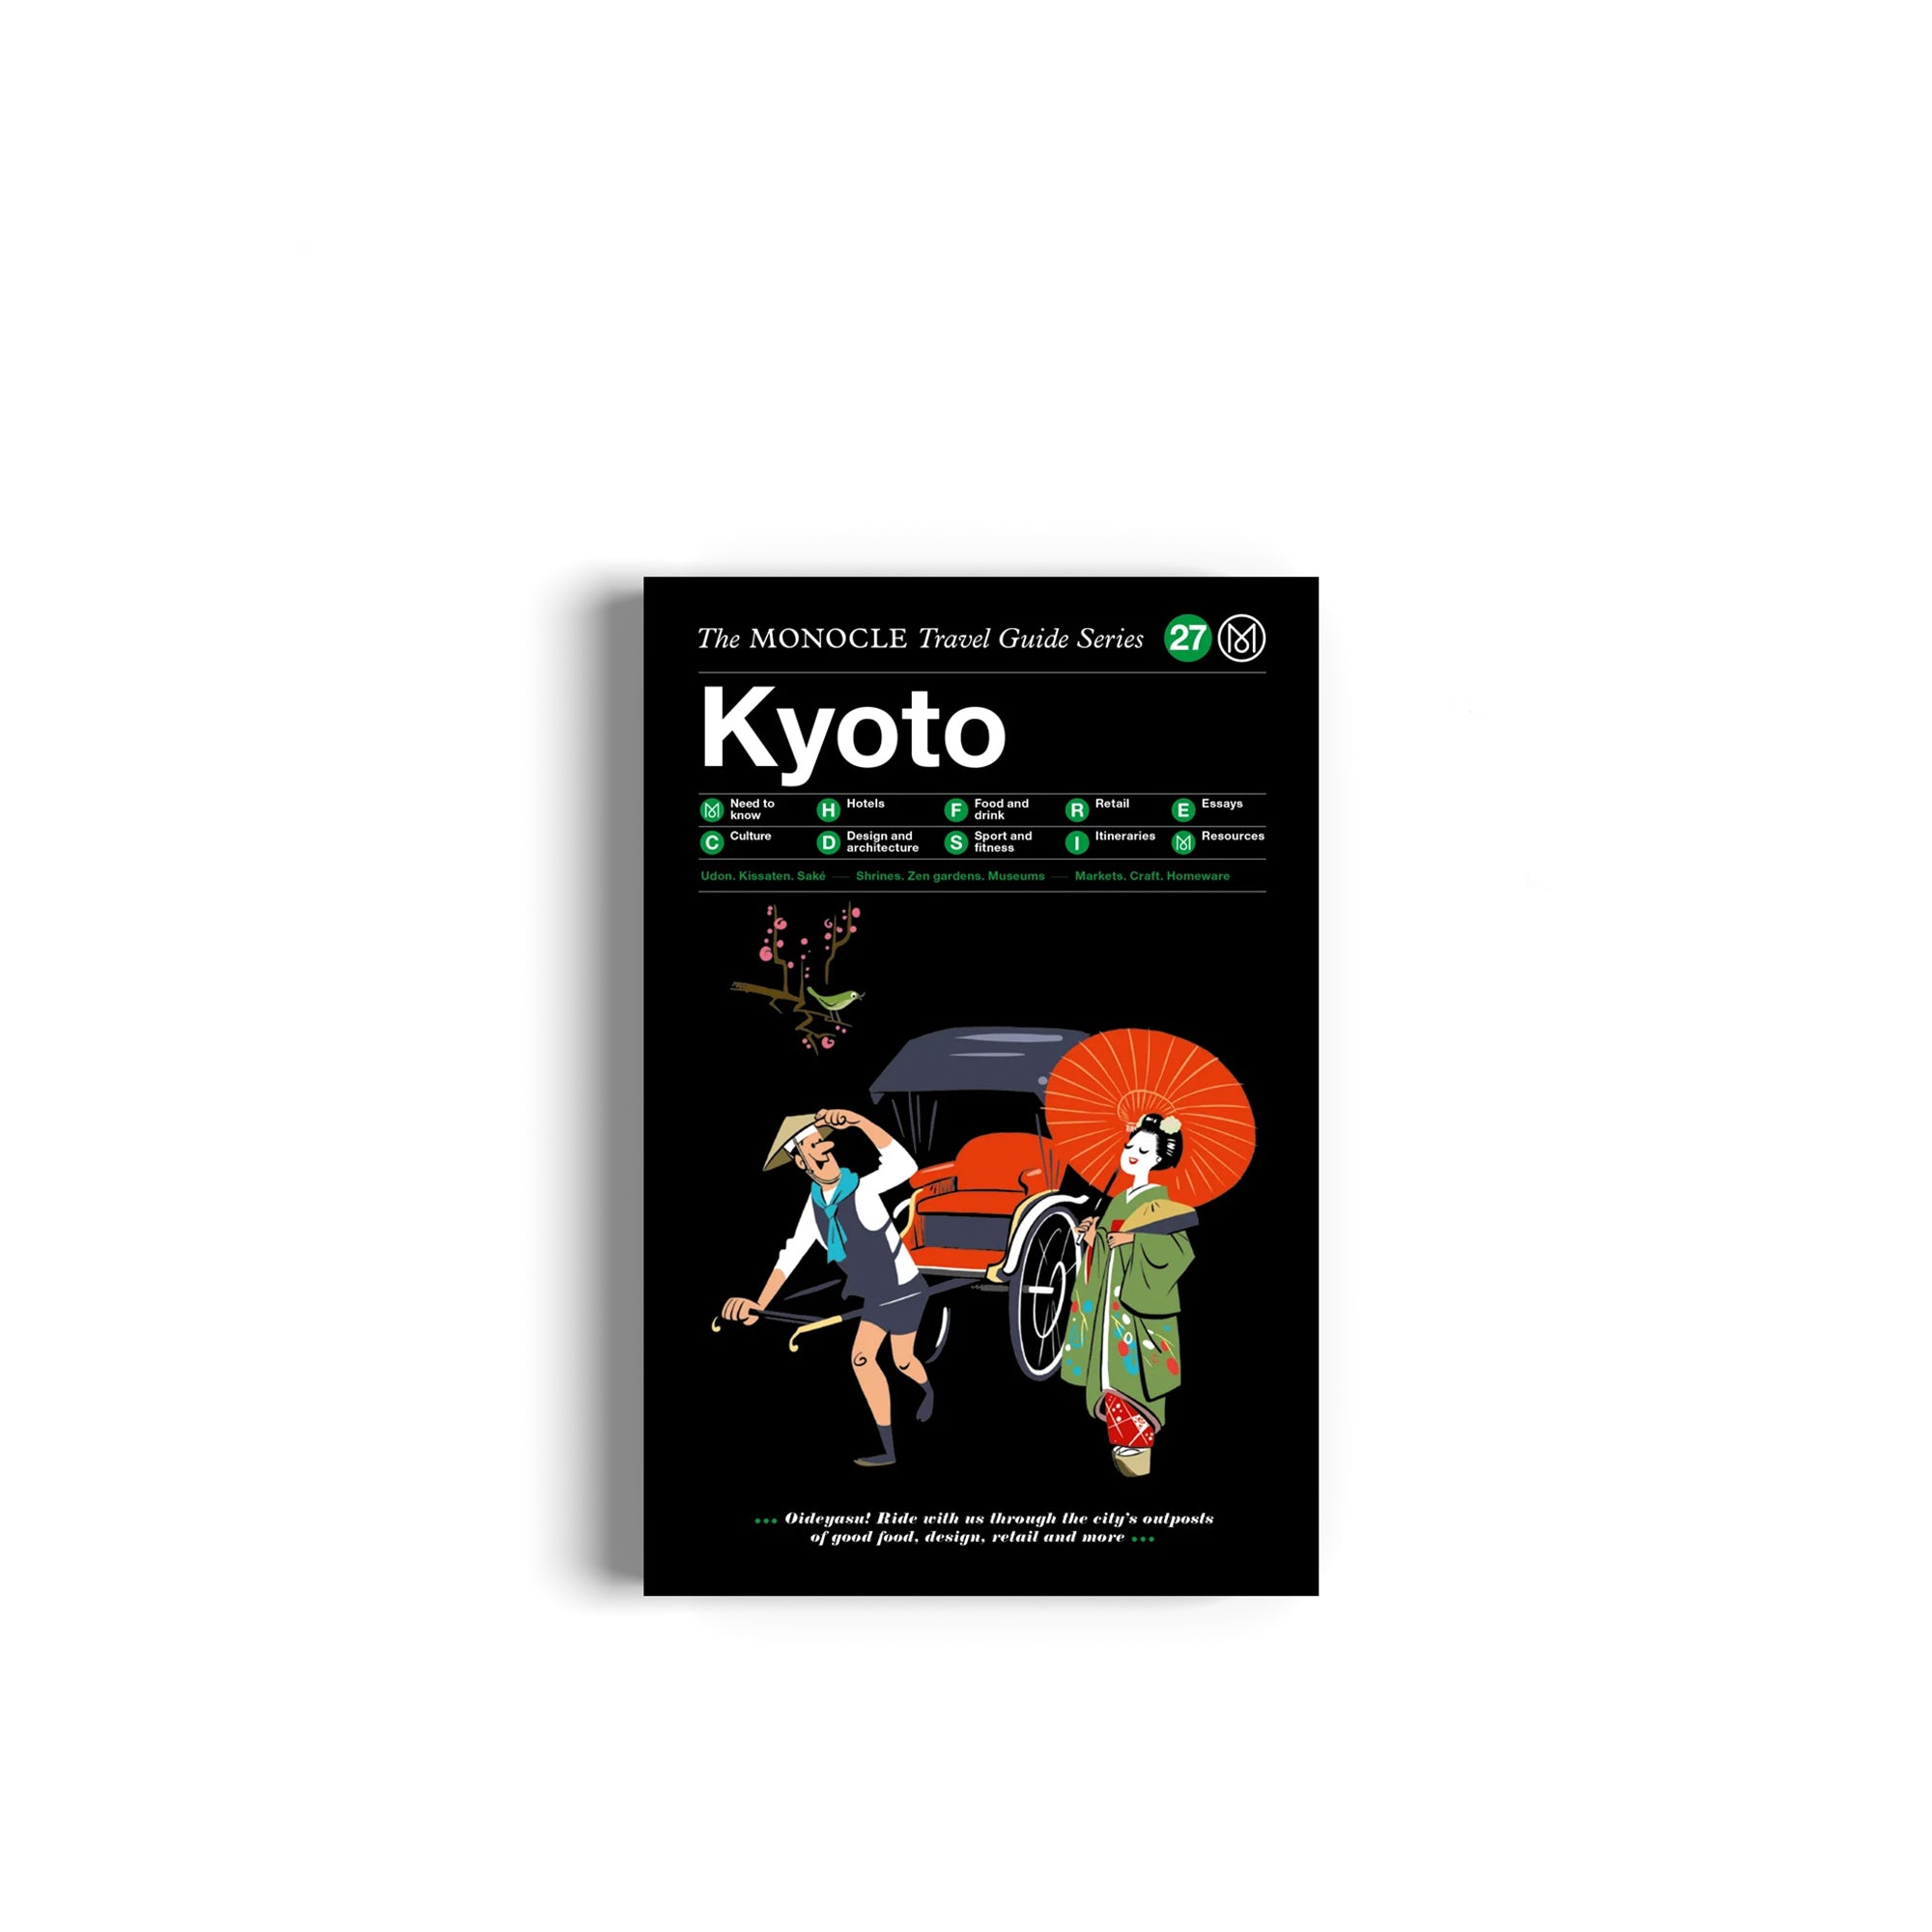 The Monocle Travel Guide Series: Kyoto